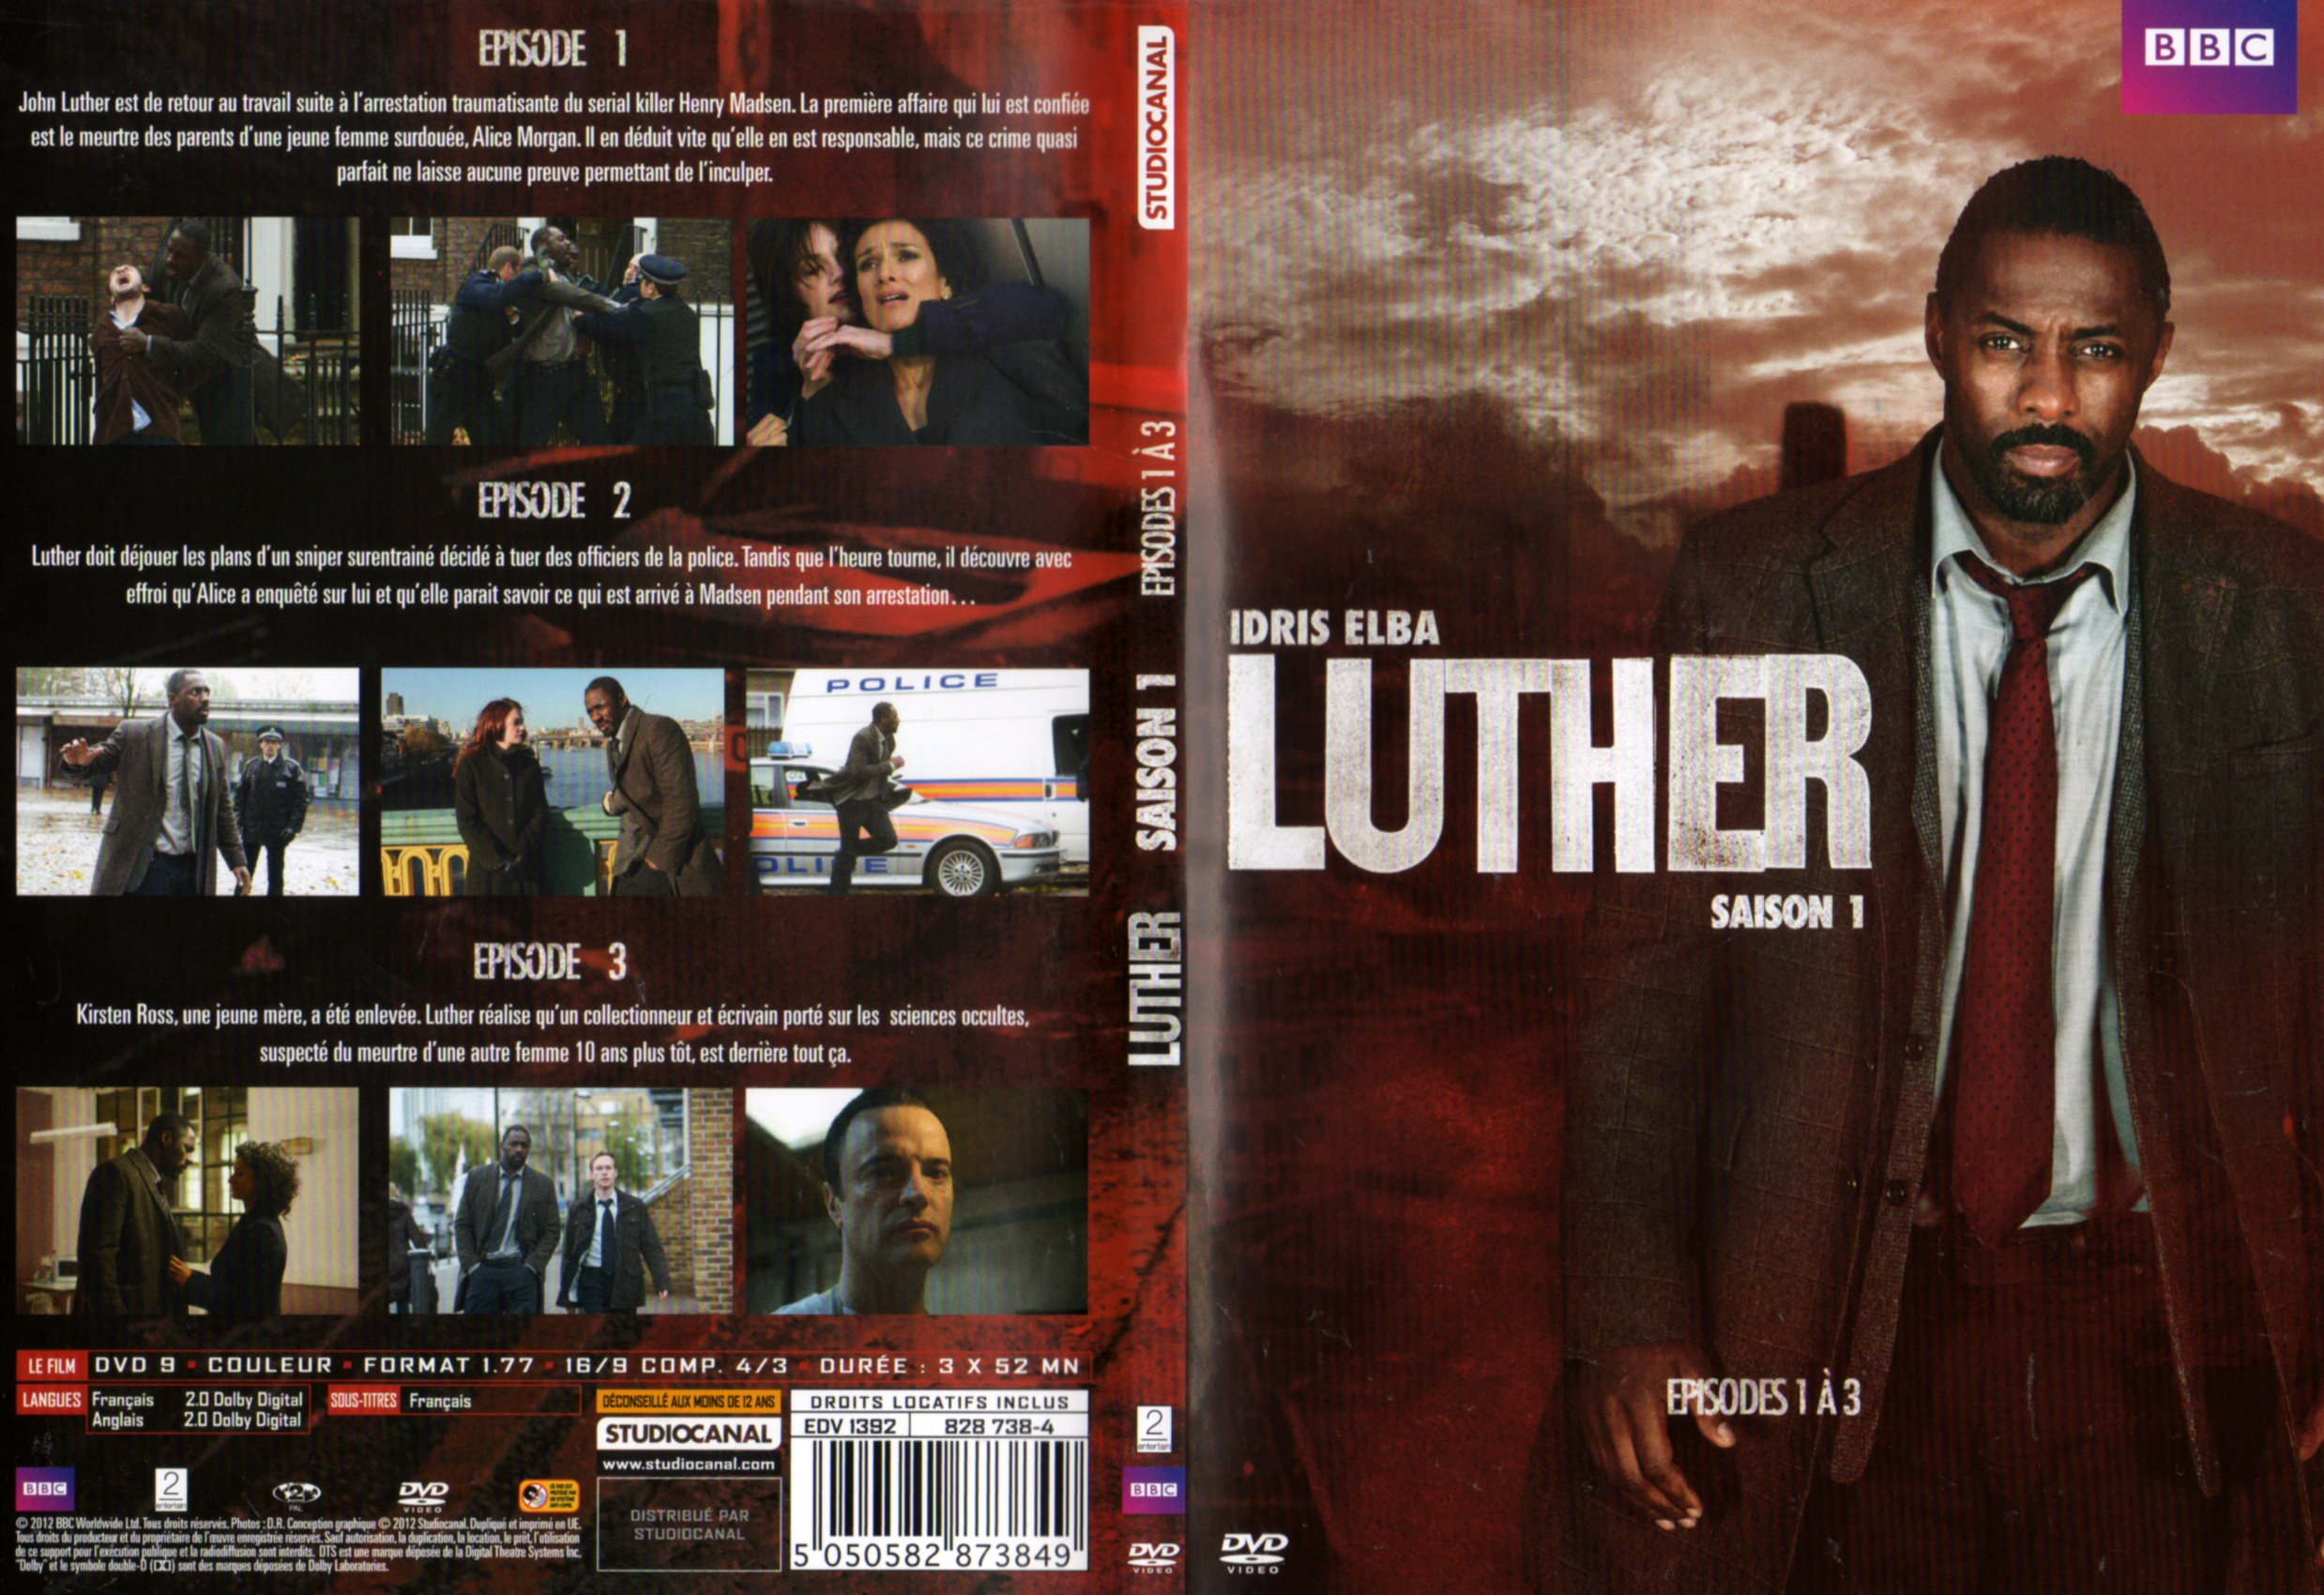 Jaquette DVD Luther Saison 1 Ep 1-2-3